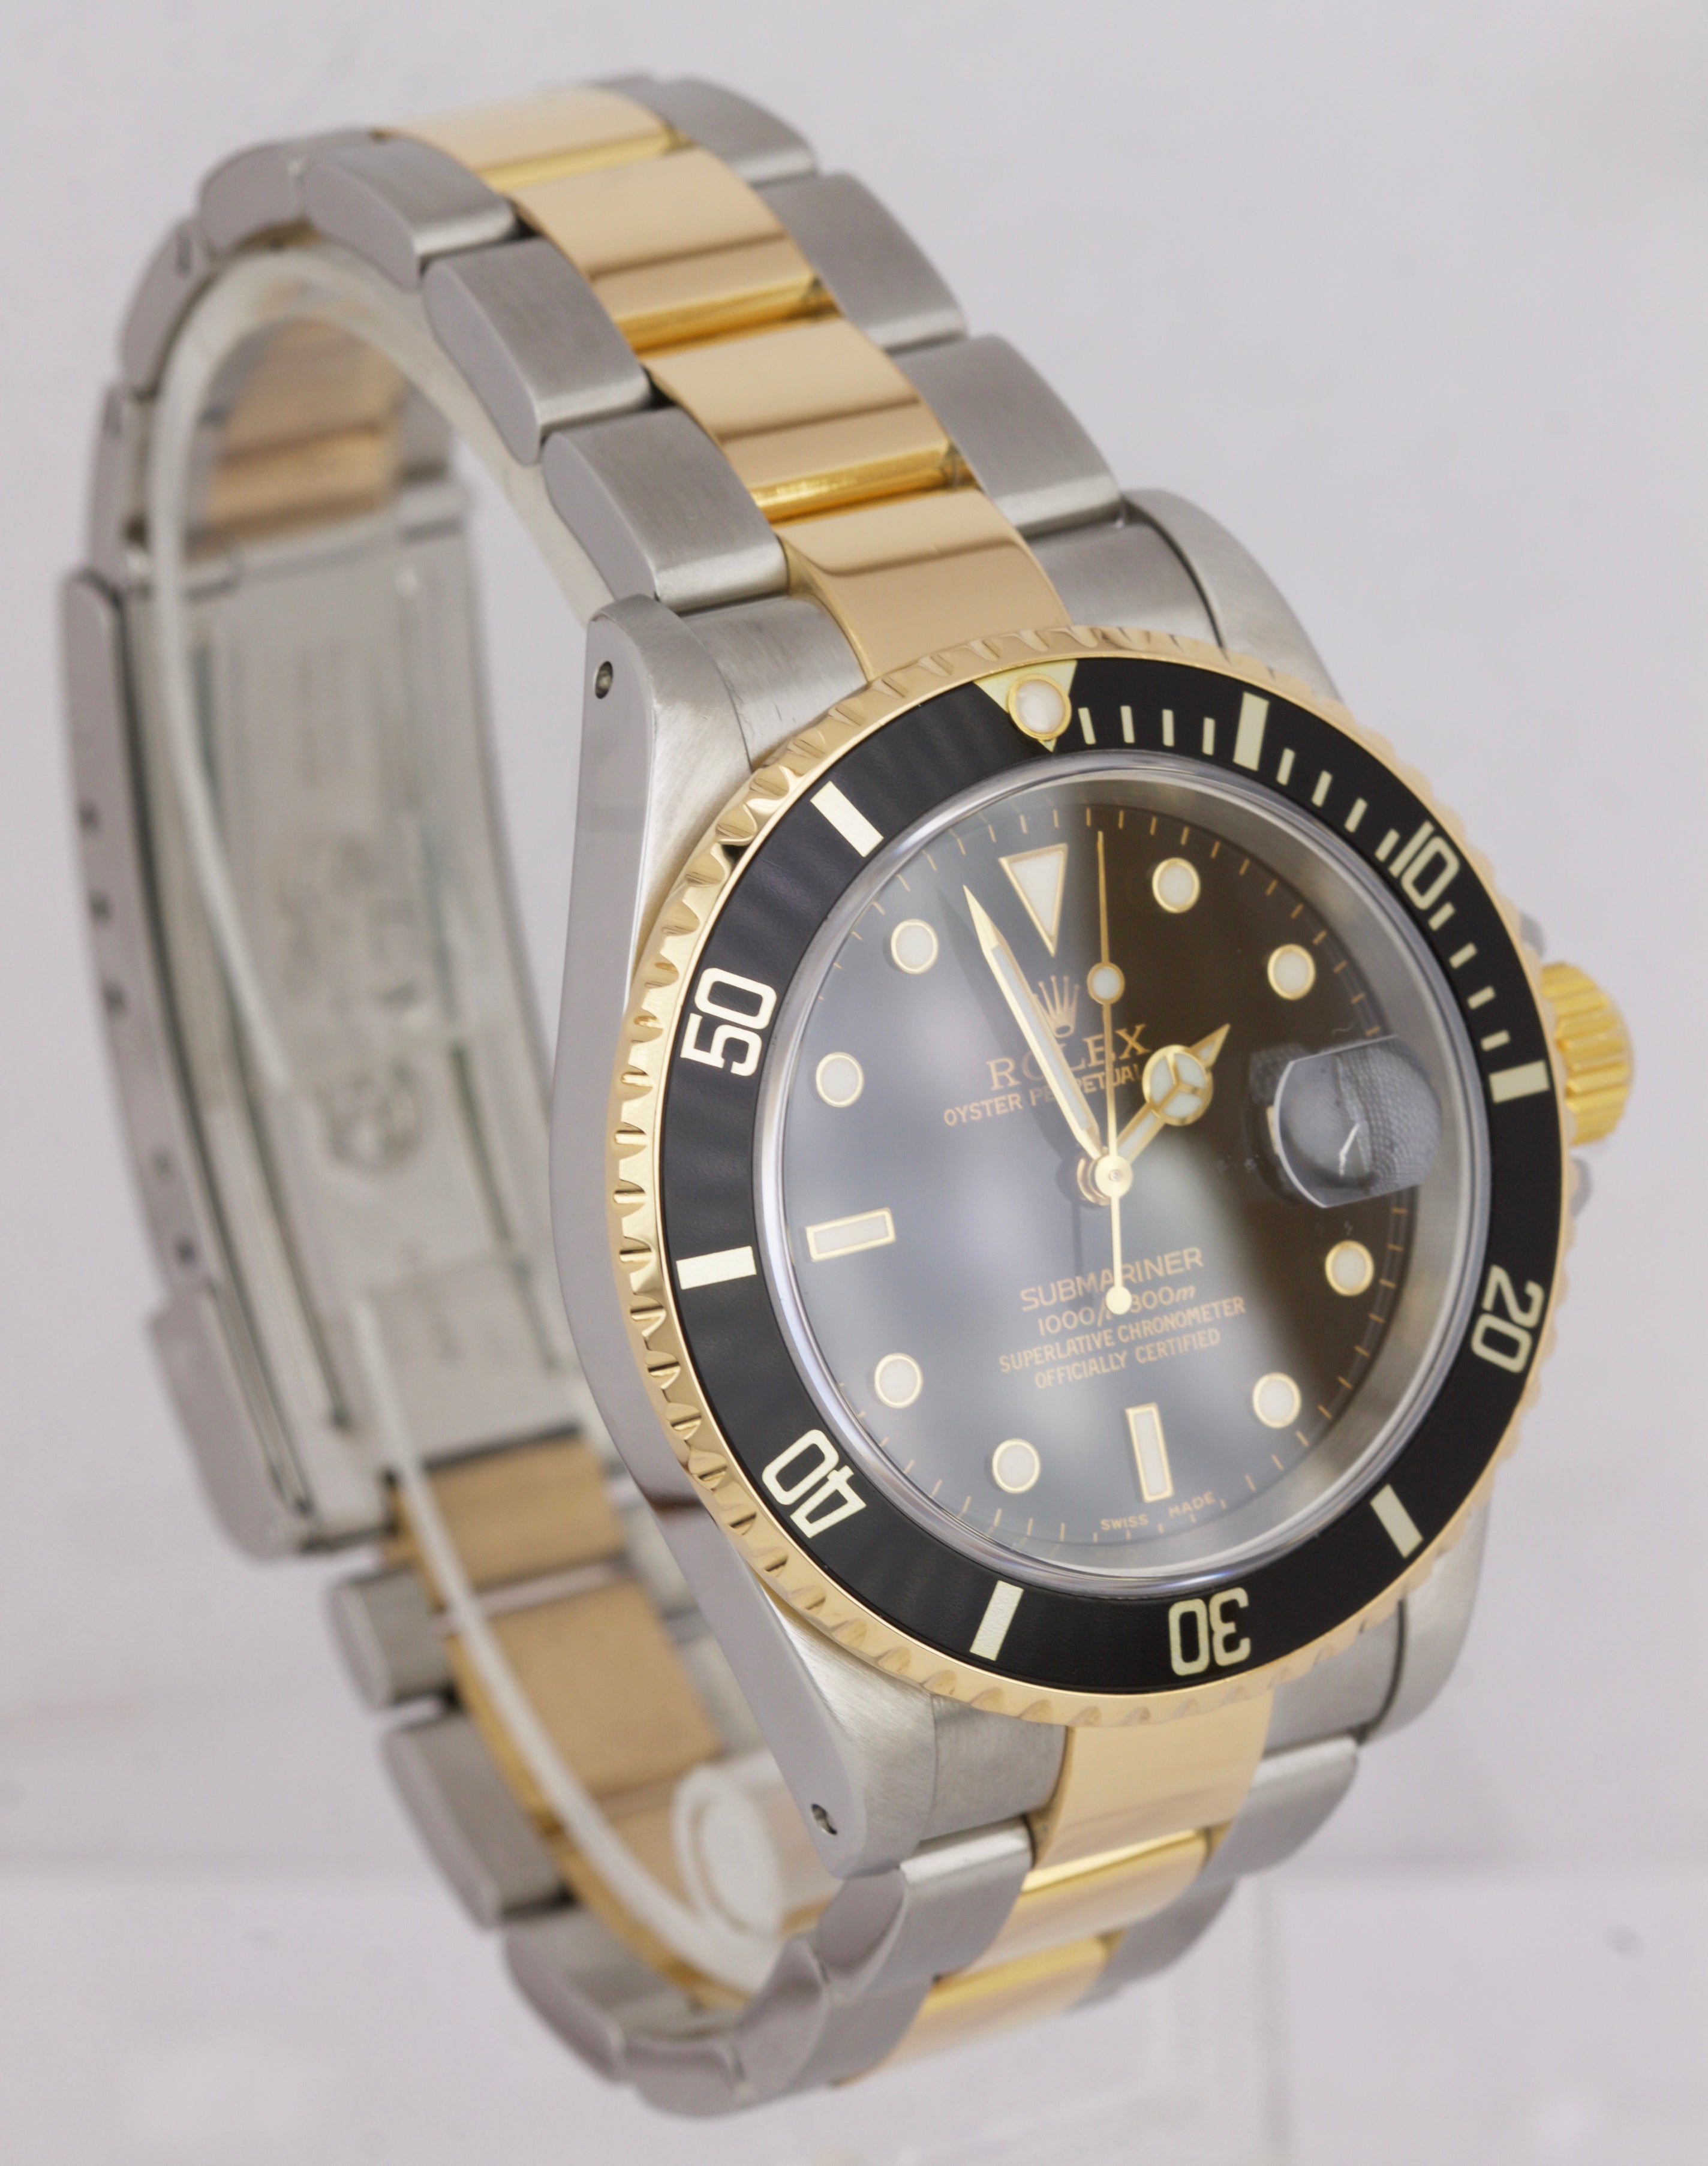 MINT 2002 Rolex Submariner 16613 Two-Tone Stainless Black Dive 40mm Watch SEL